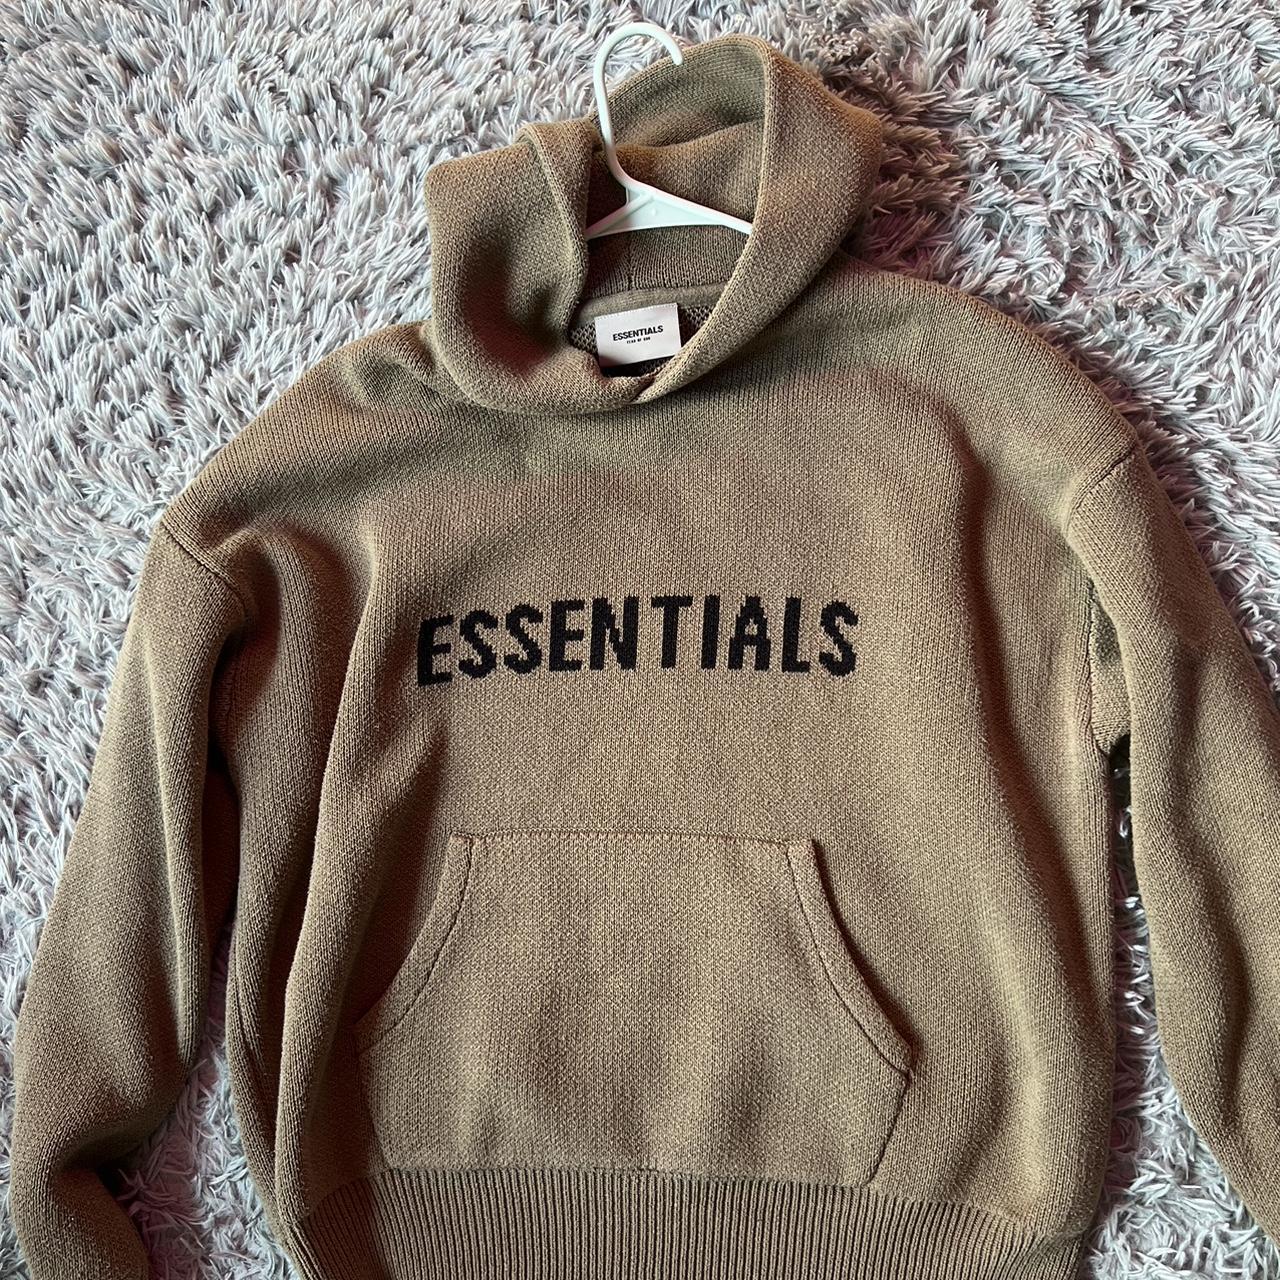 Fear of god essentials oversized hoodie. No other